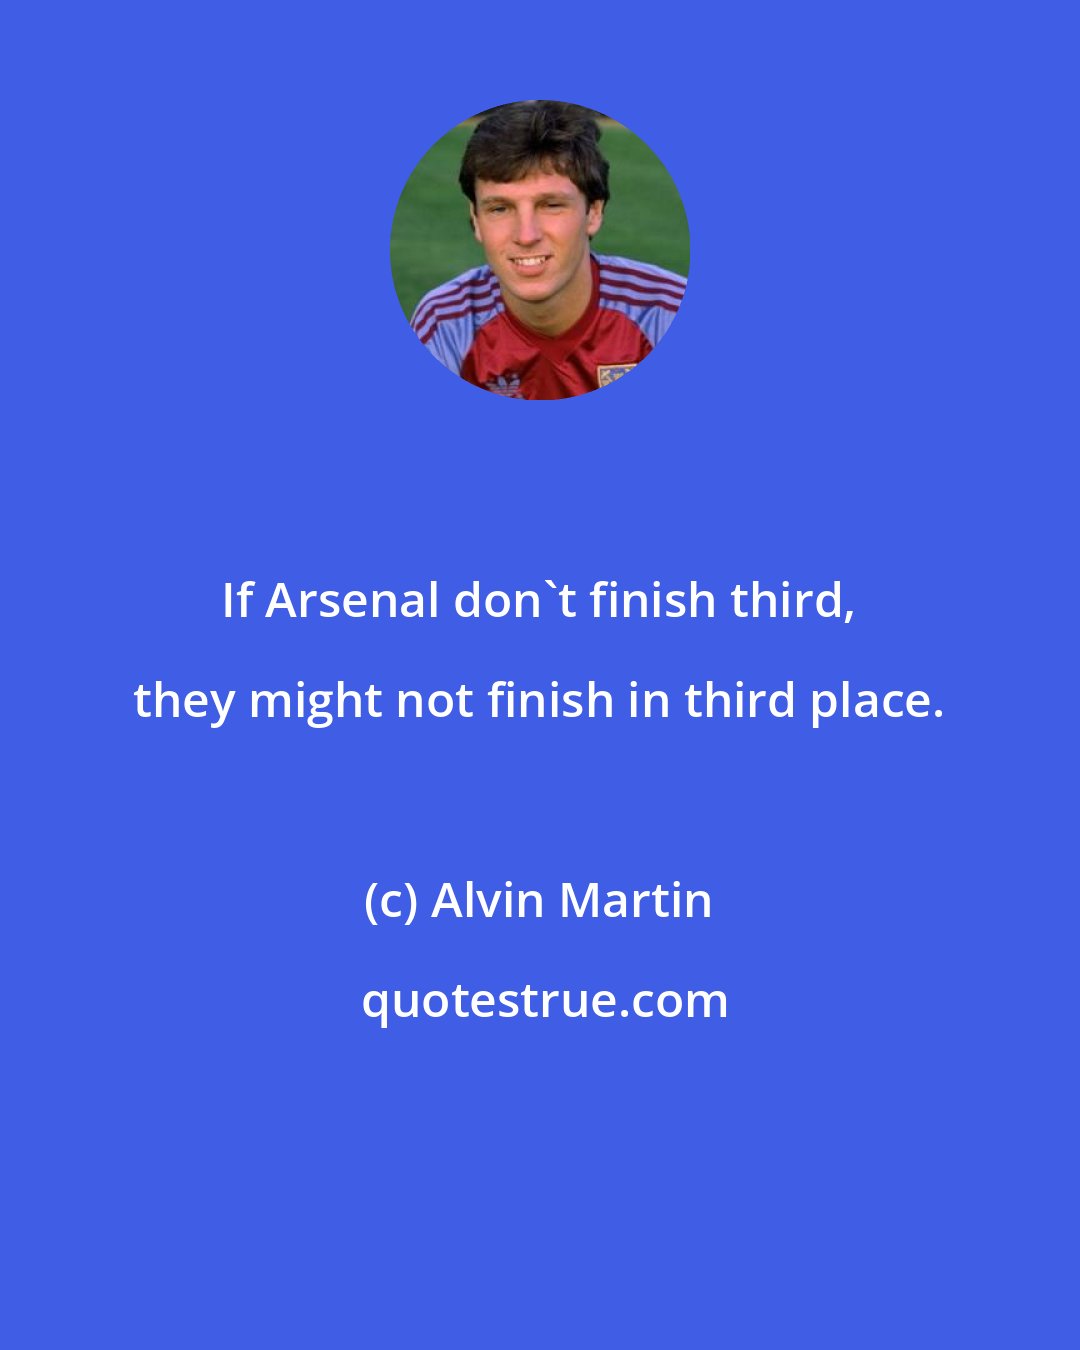 Alvin Martin: If Arsenal don't finish third, they might not finish in third place.